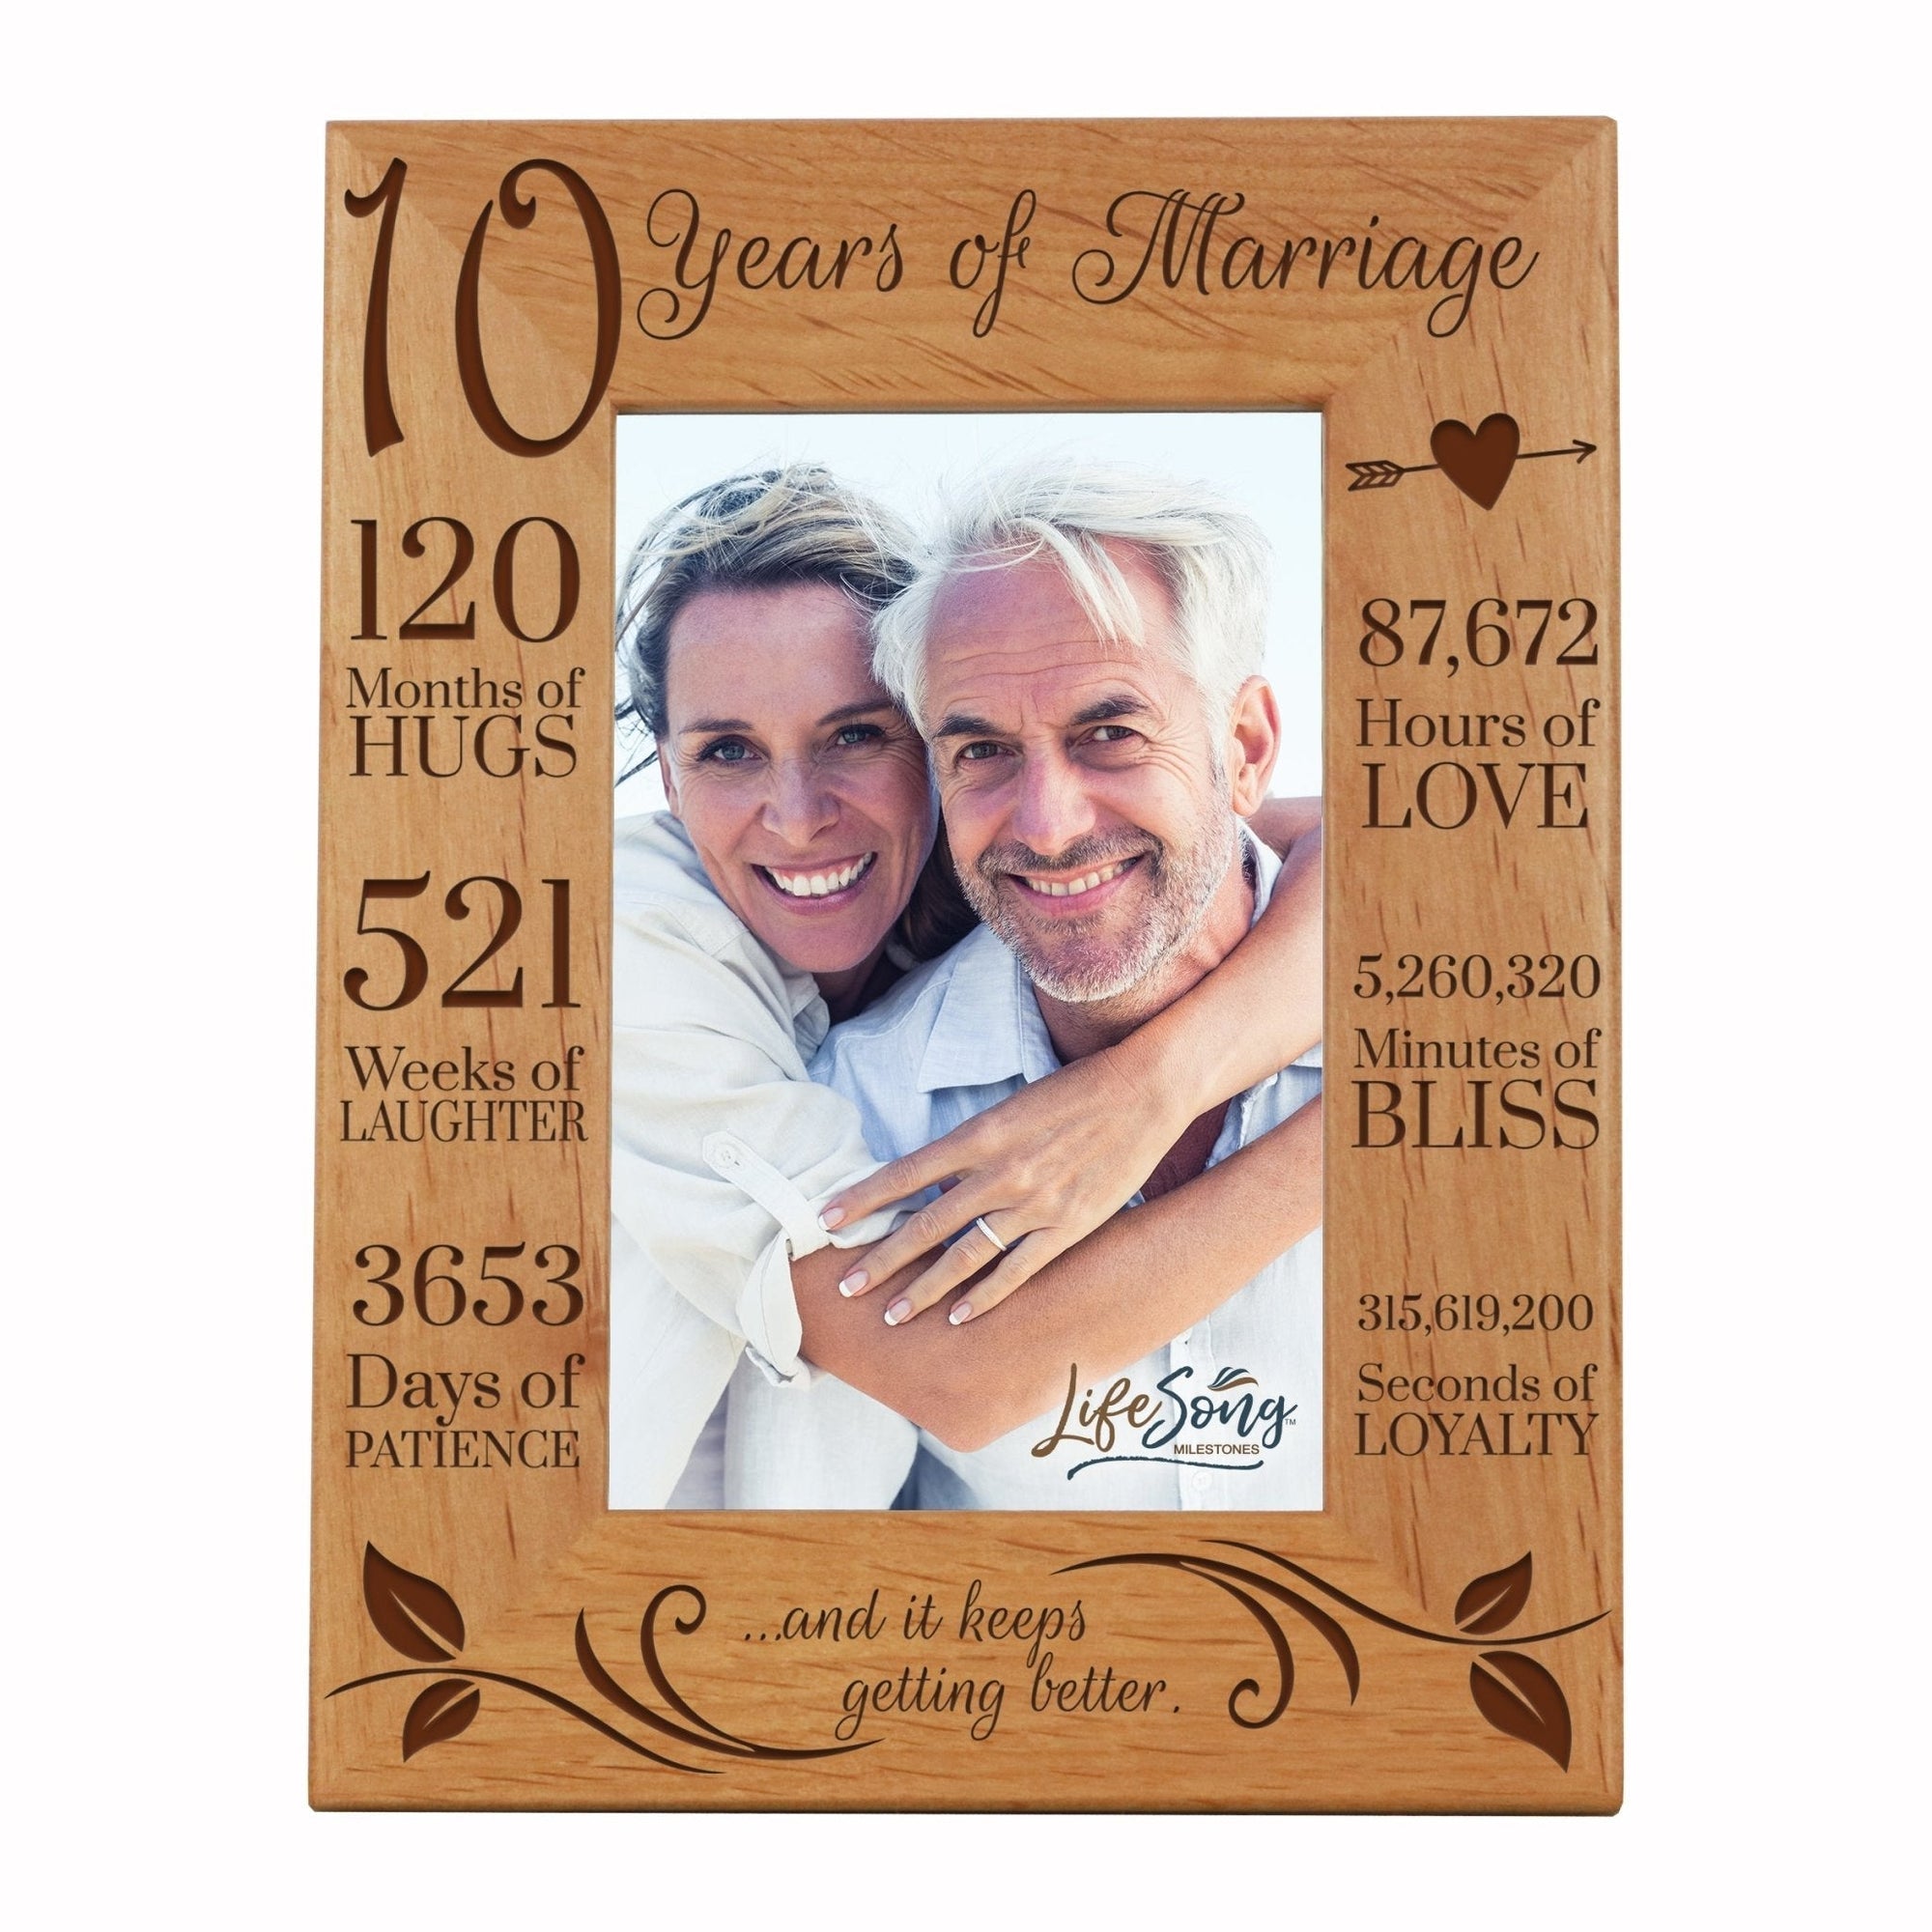 Engraved 10th Anniversary Picture Frame Gift for Couples - Keeps Getting Better - LifeSong Milestones